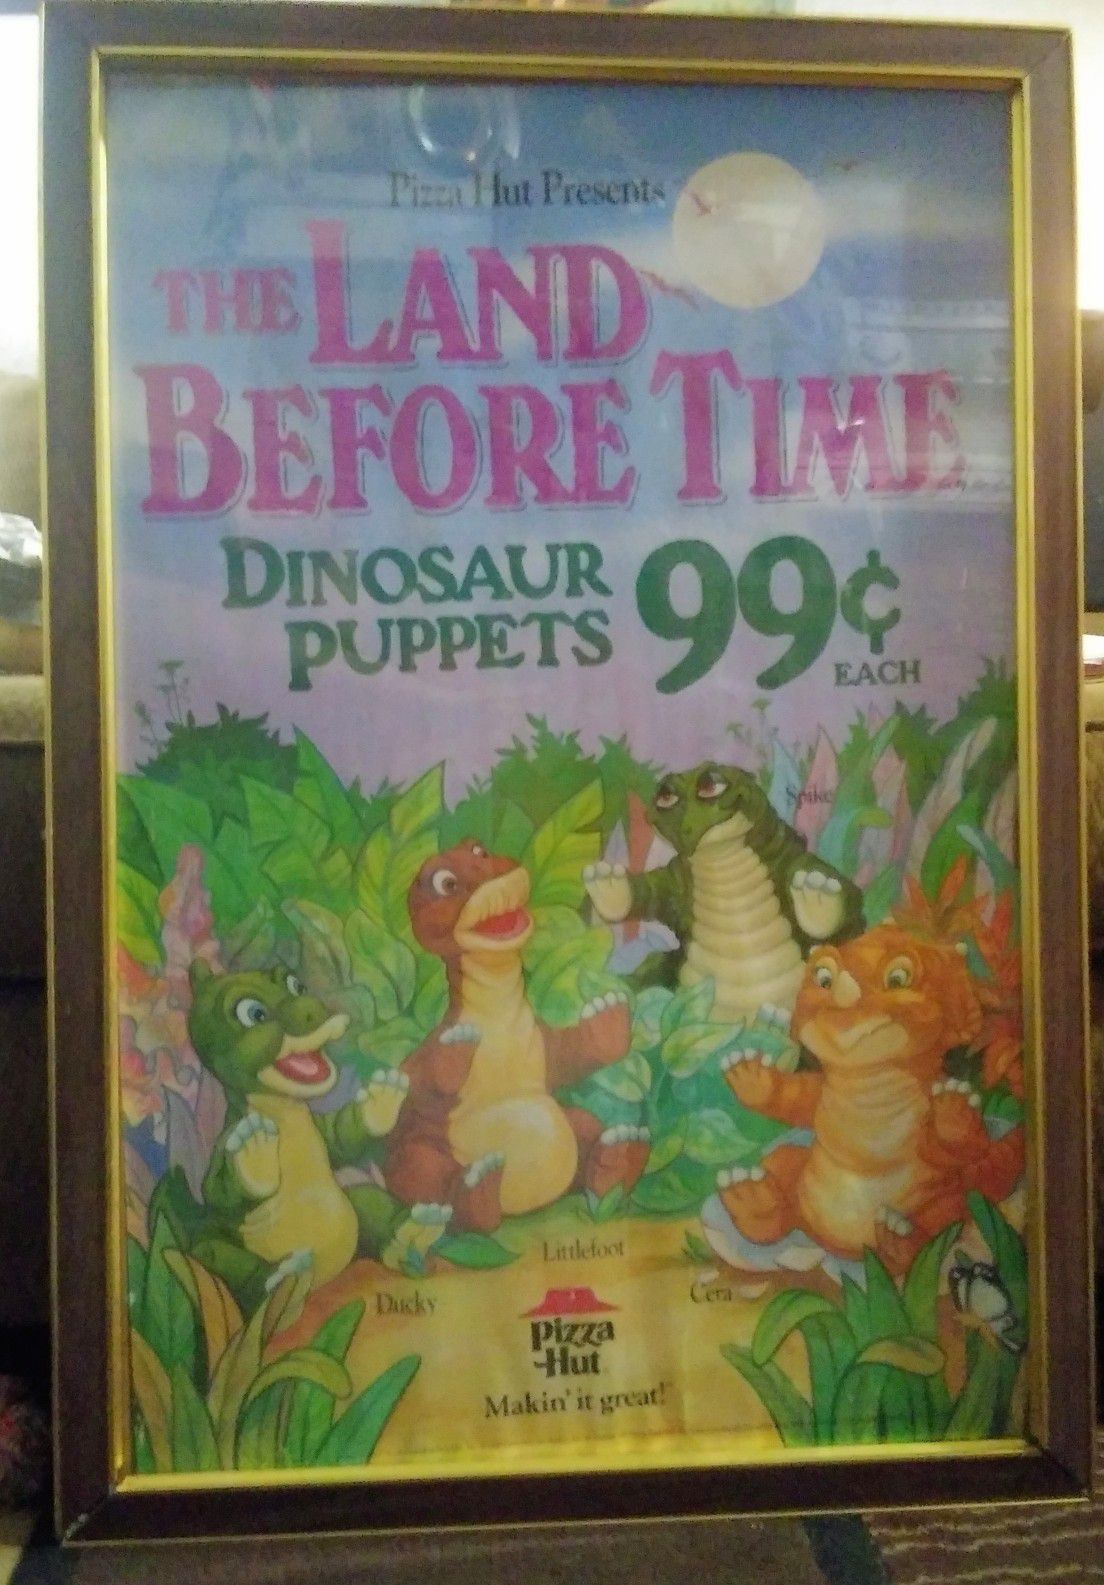 1988 Pizza Hut Land Before Time Promotional Advertising Poster